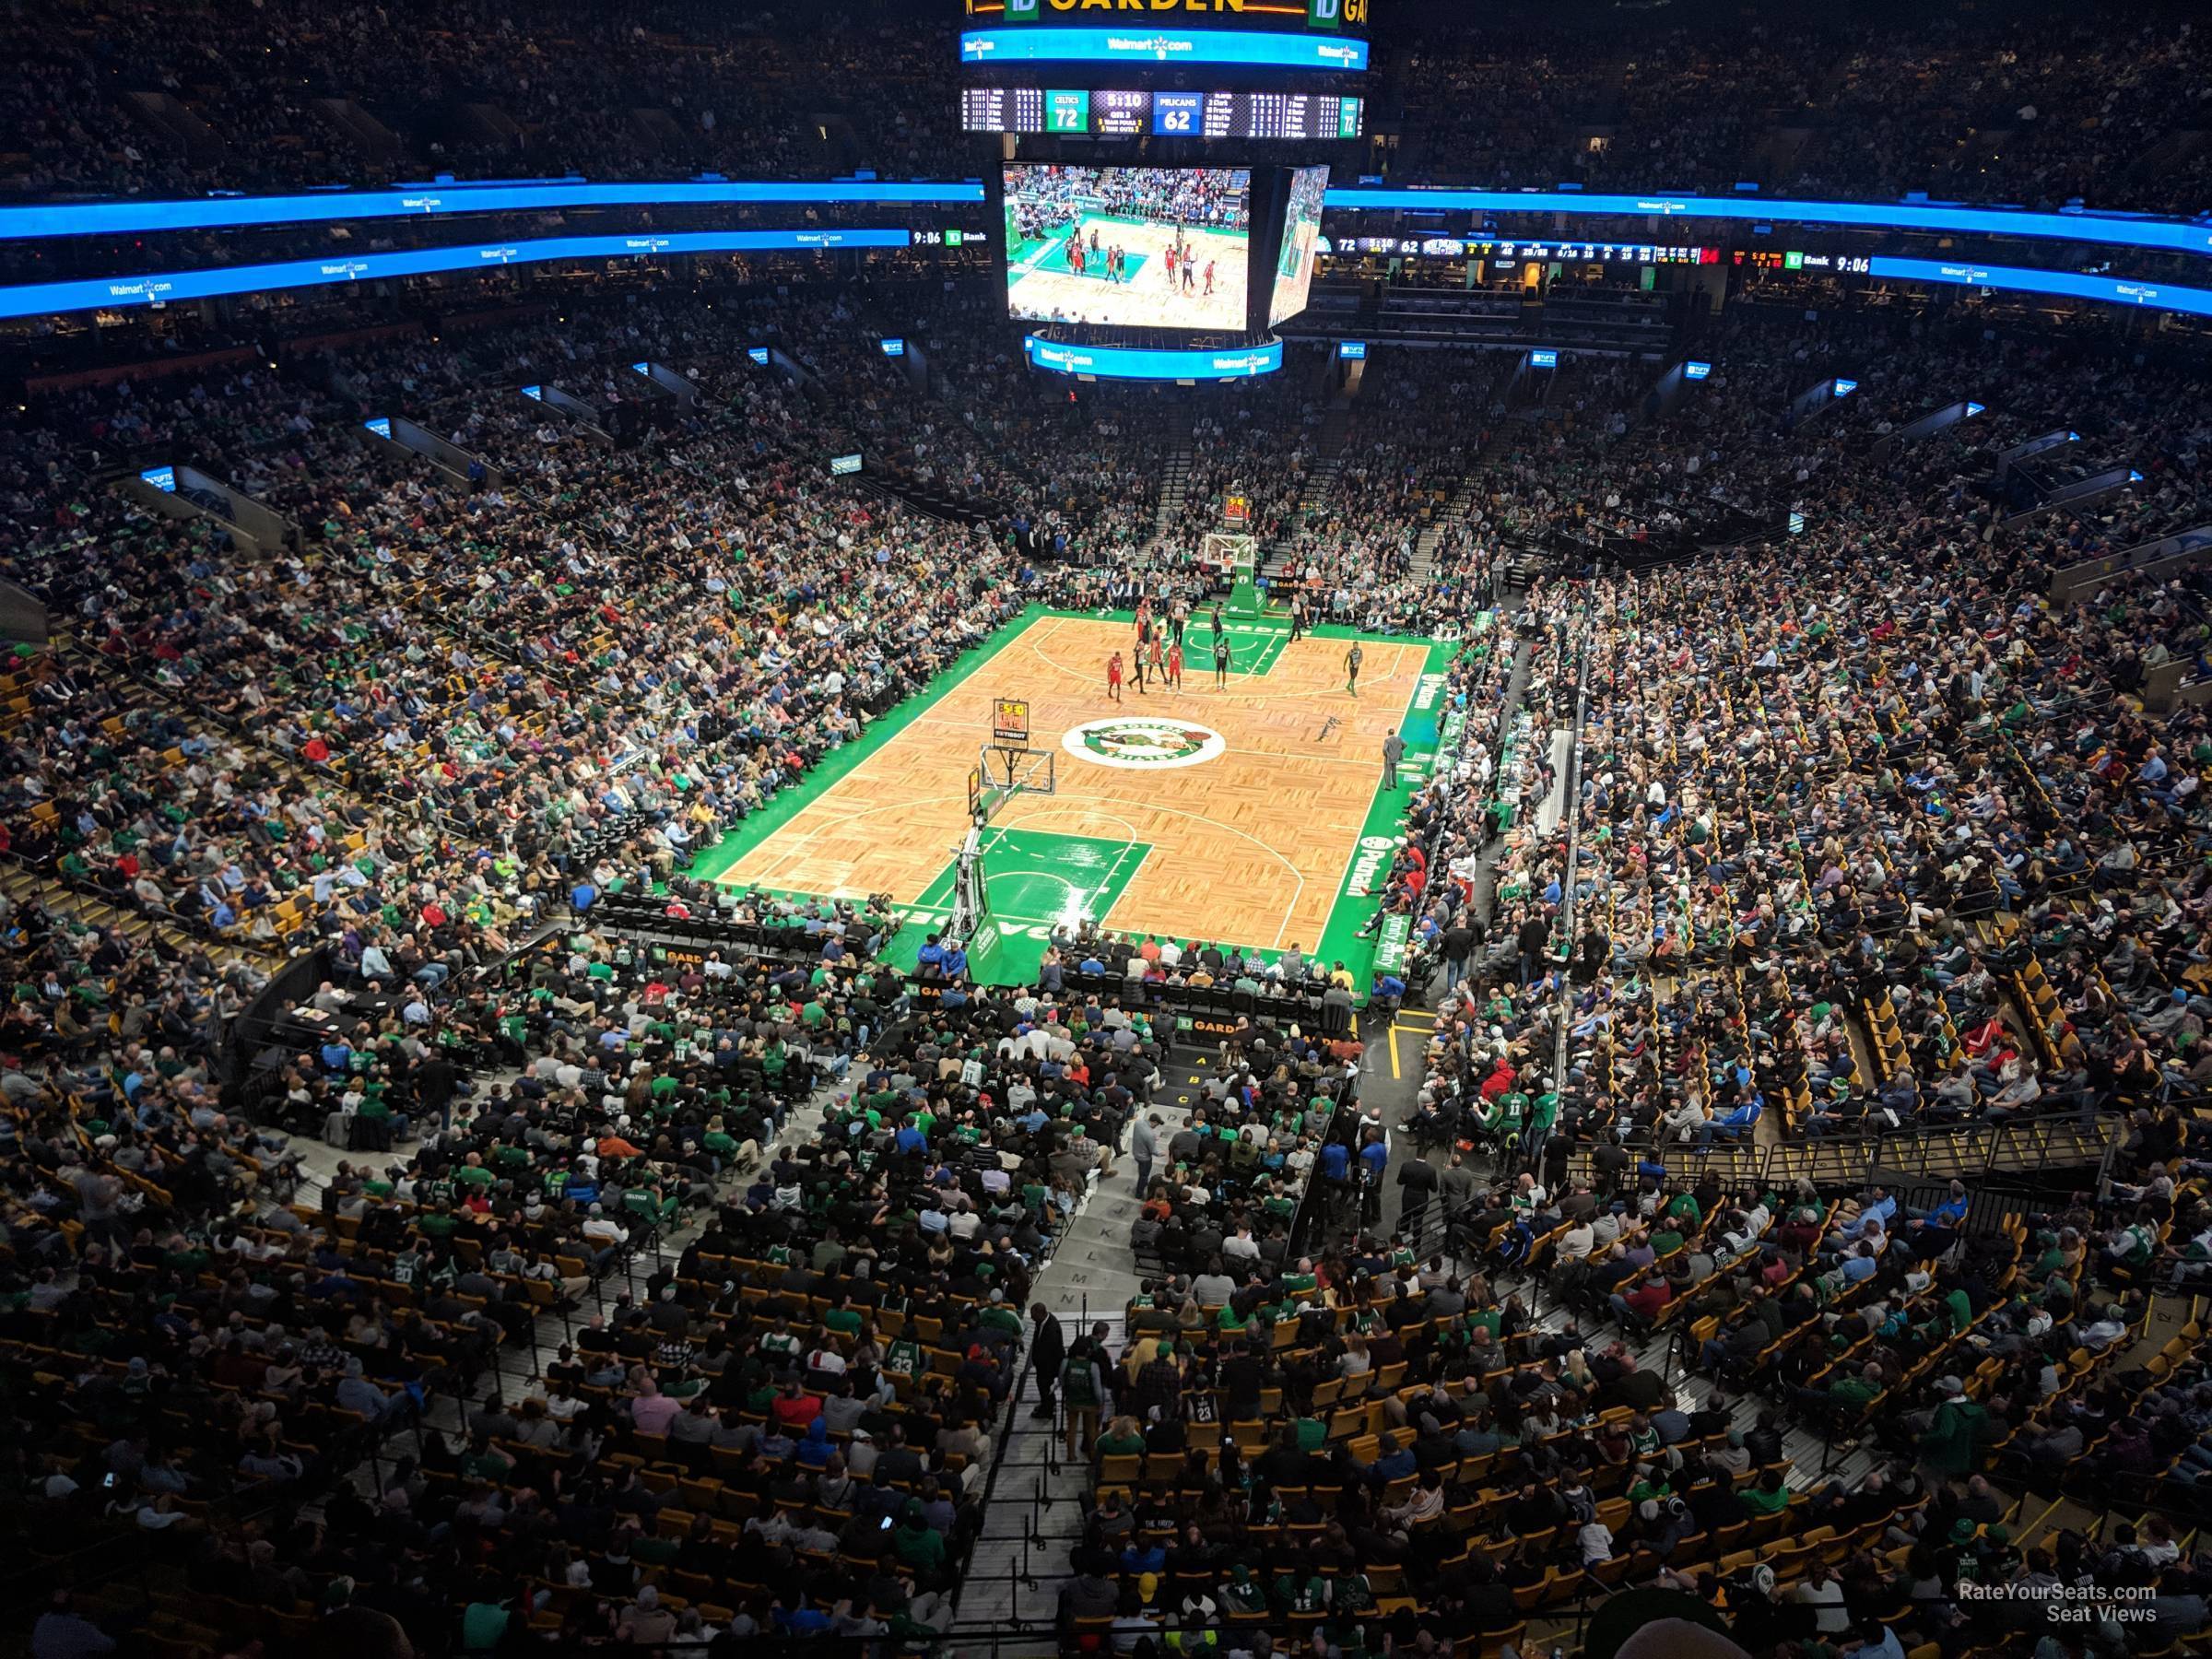 section 307, row 3 seat view  for basketball - td garden